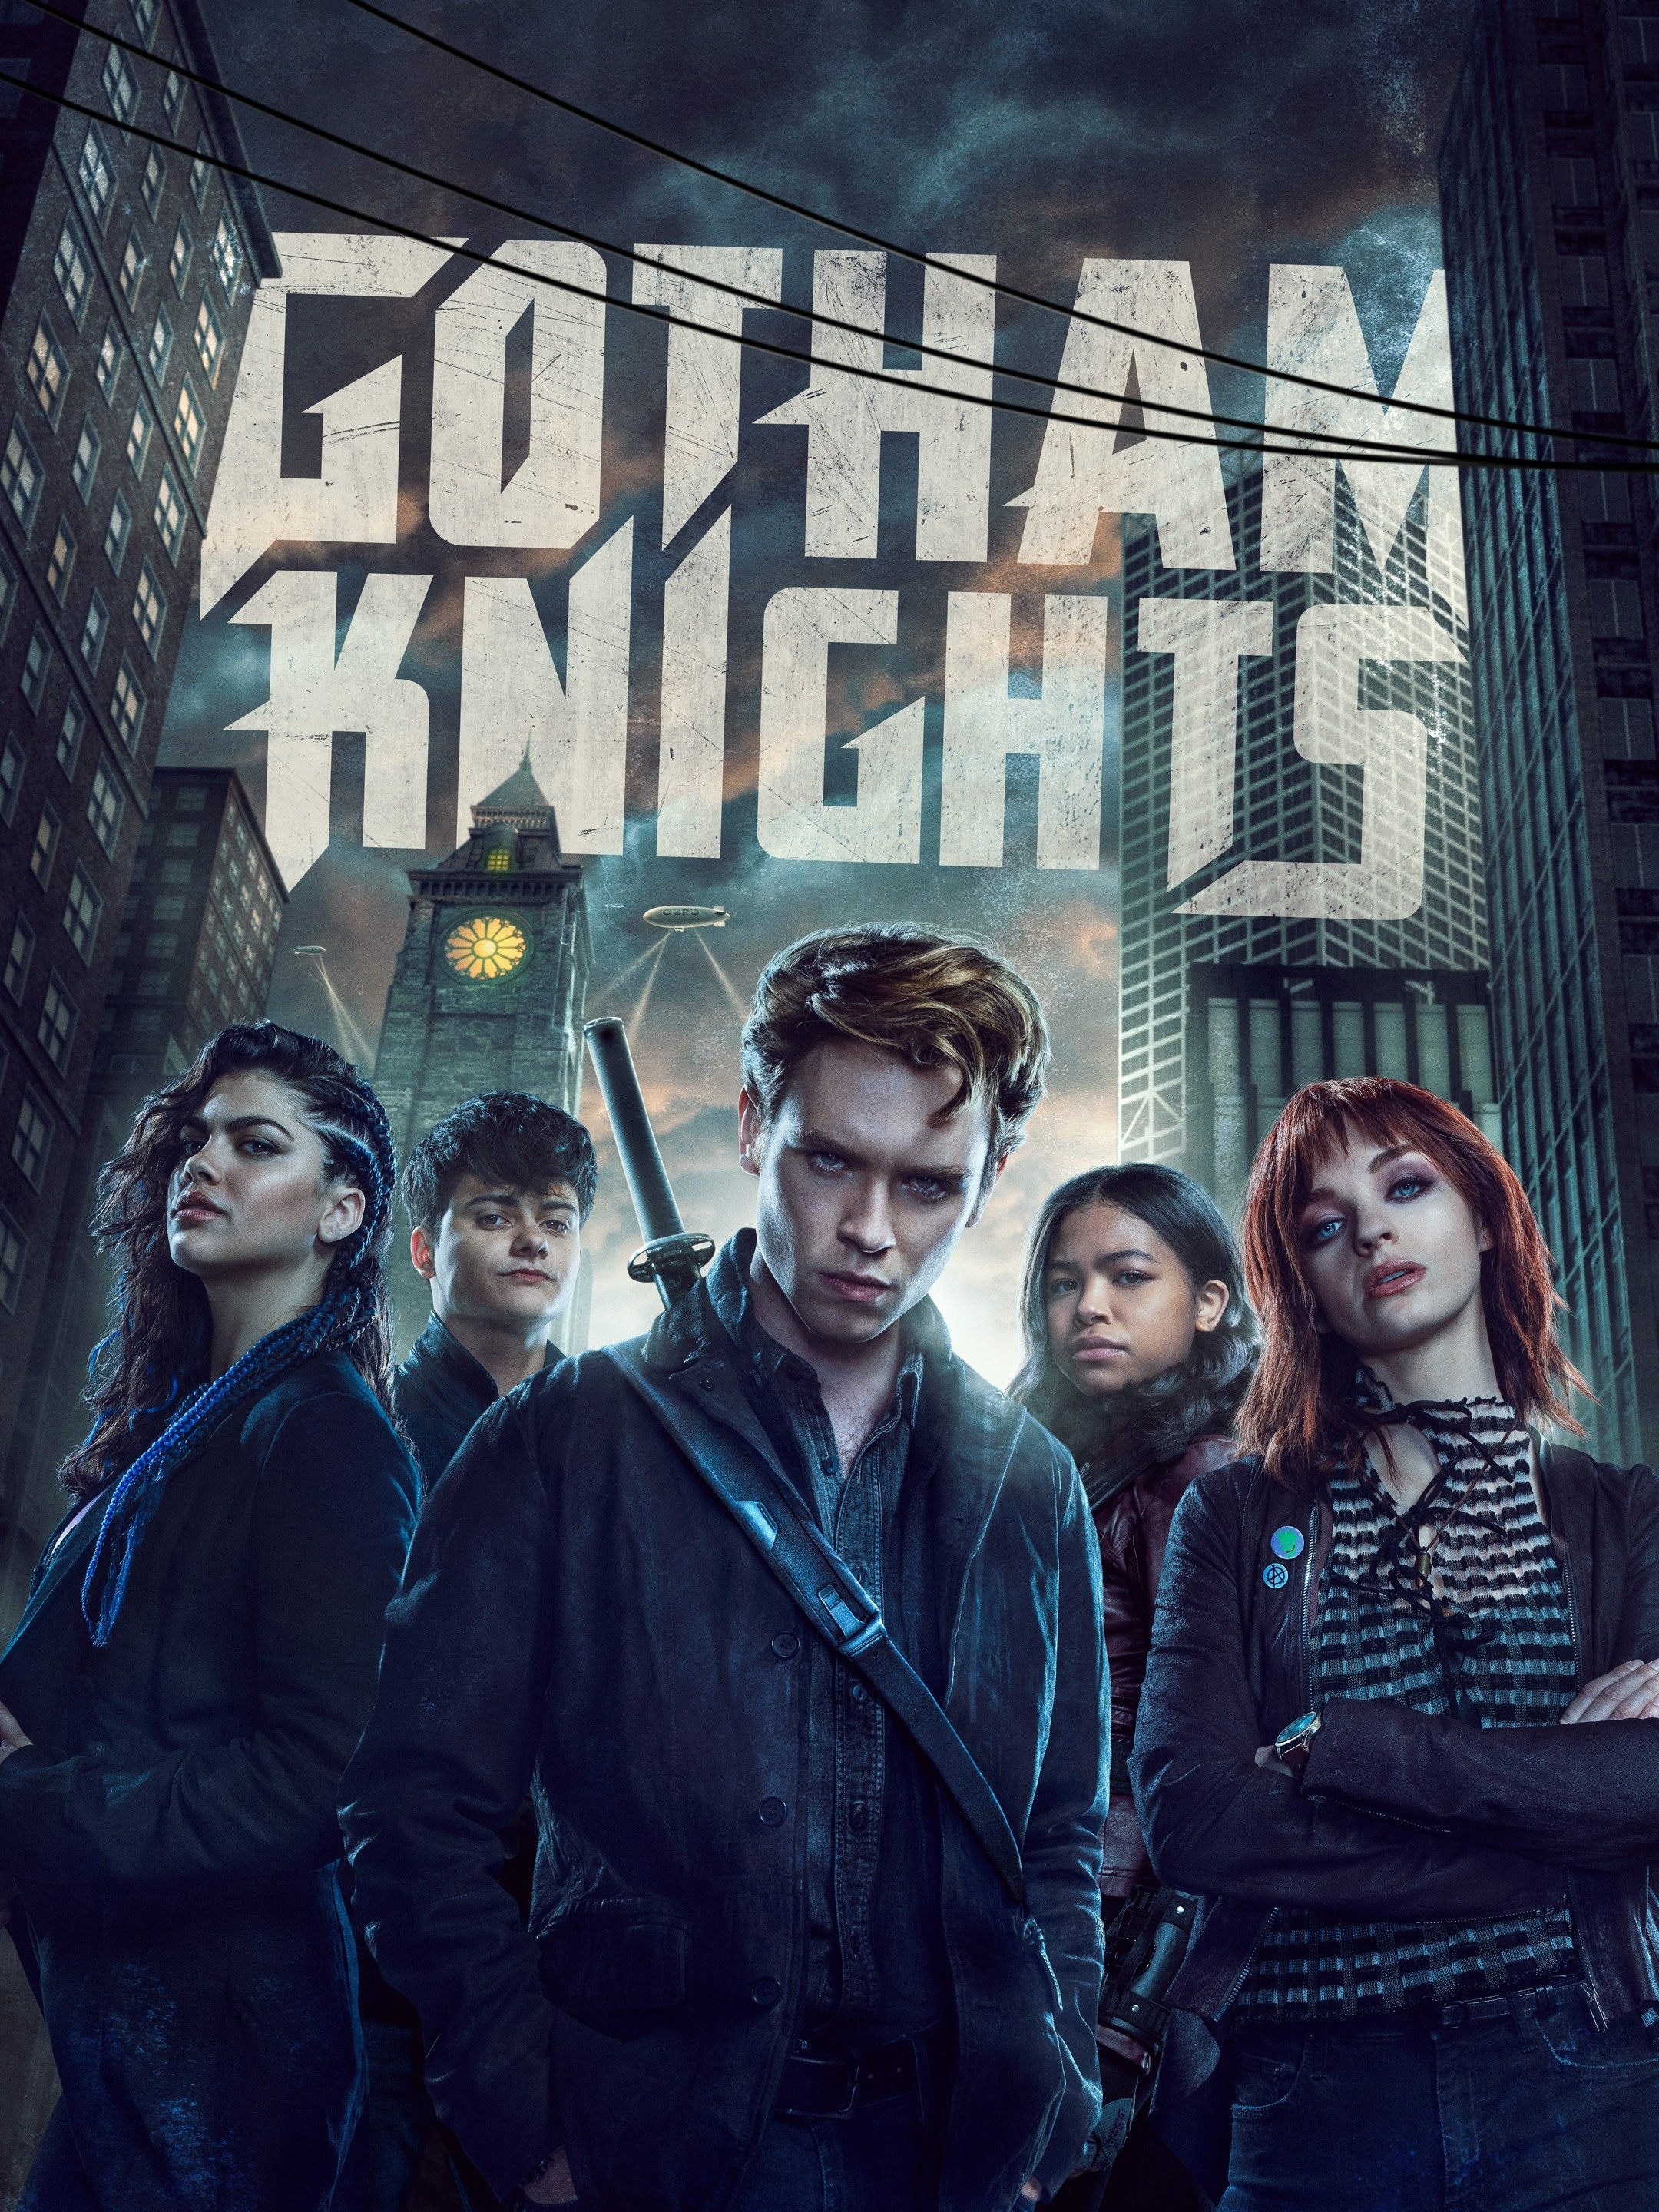 Review: Fighting crime together has its flaws in 'Gotham Knights